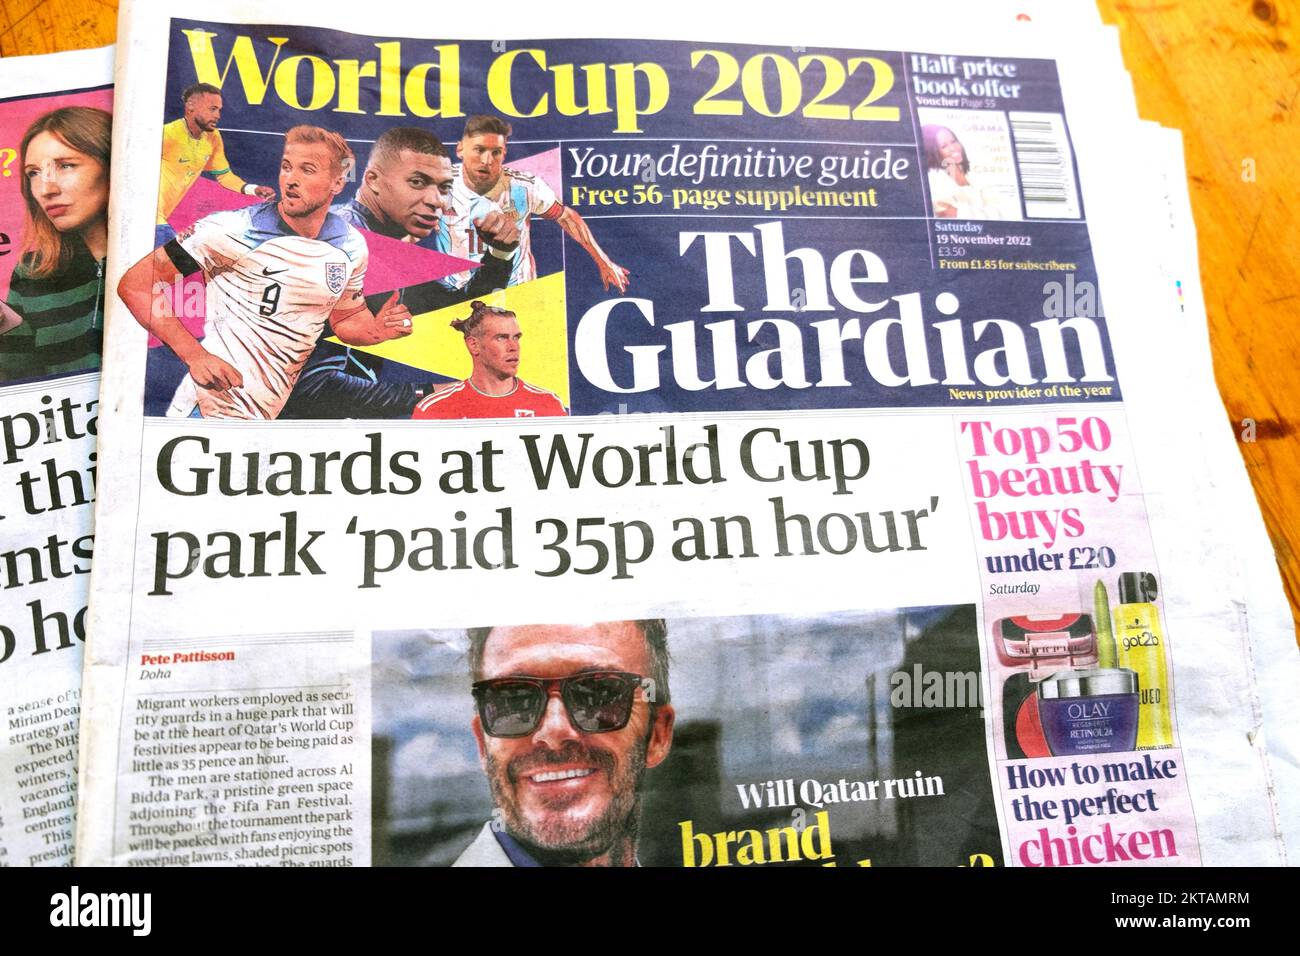 'Guards at World Cup park 'paid 35p an hour' David Beckham front page Guardian newspaper headline Qatar World Cup 2022 football article London UK Stock Photo